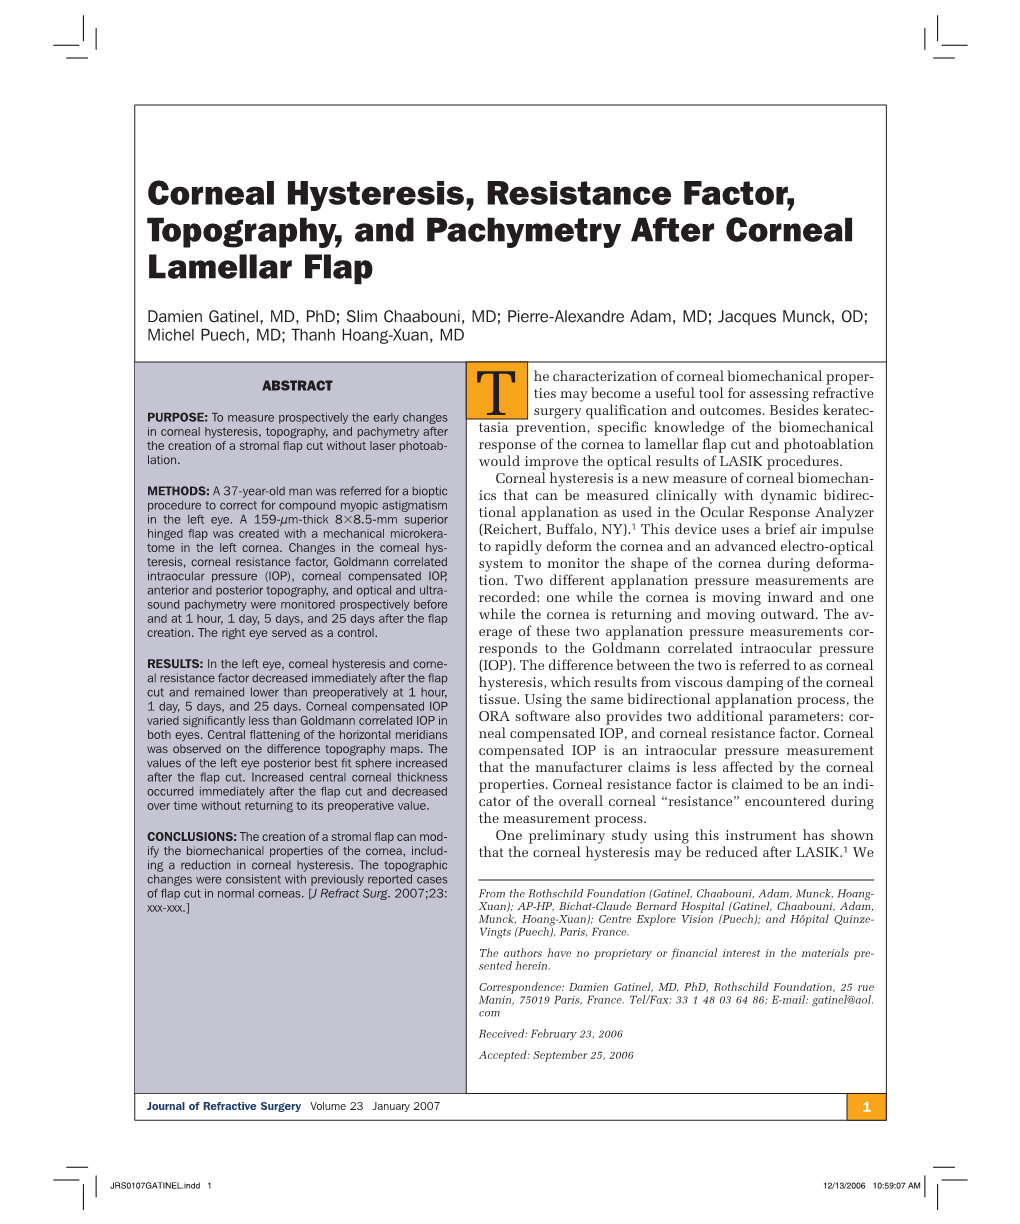 Corneal Hysteresis, Resistance Factor, Topography, and Pachymetry After Corneal Lamellar Flap